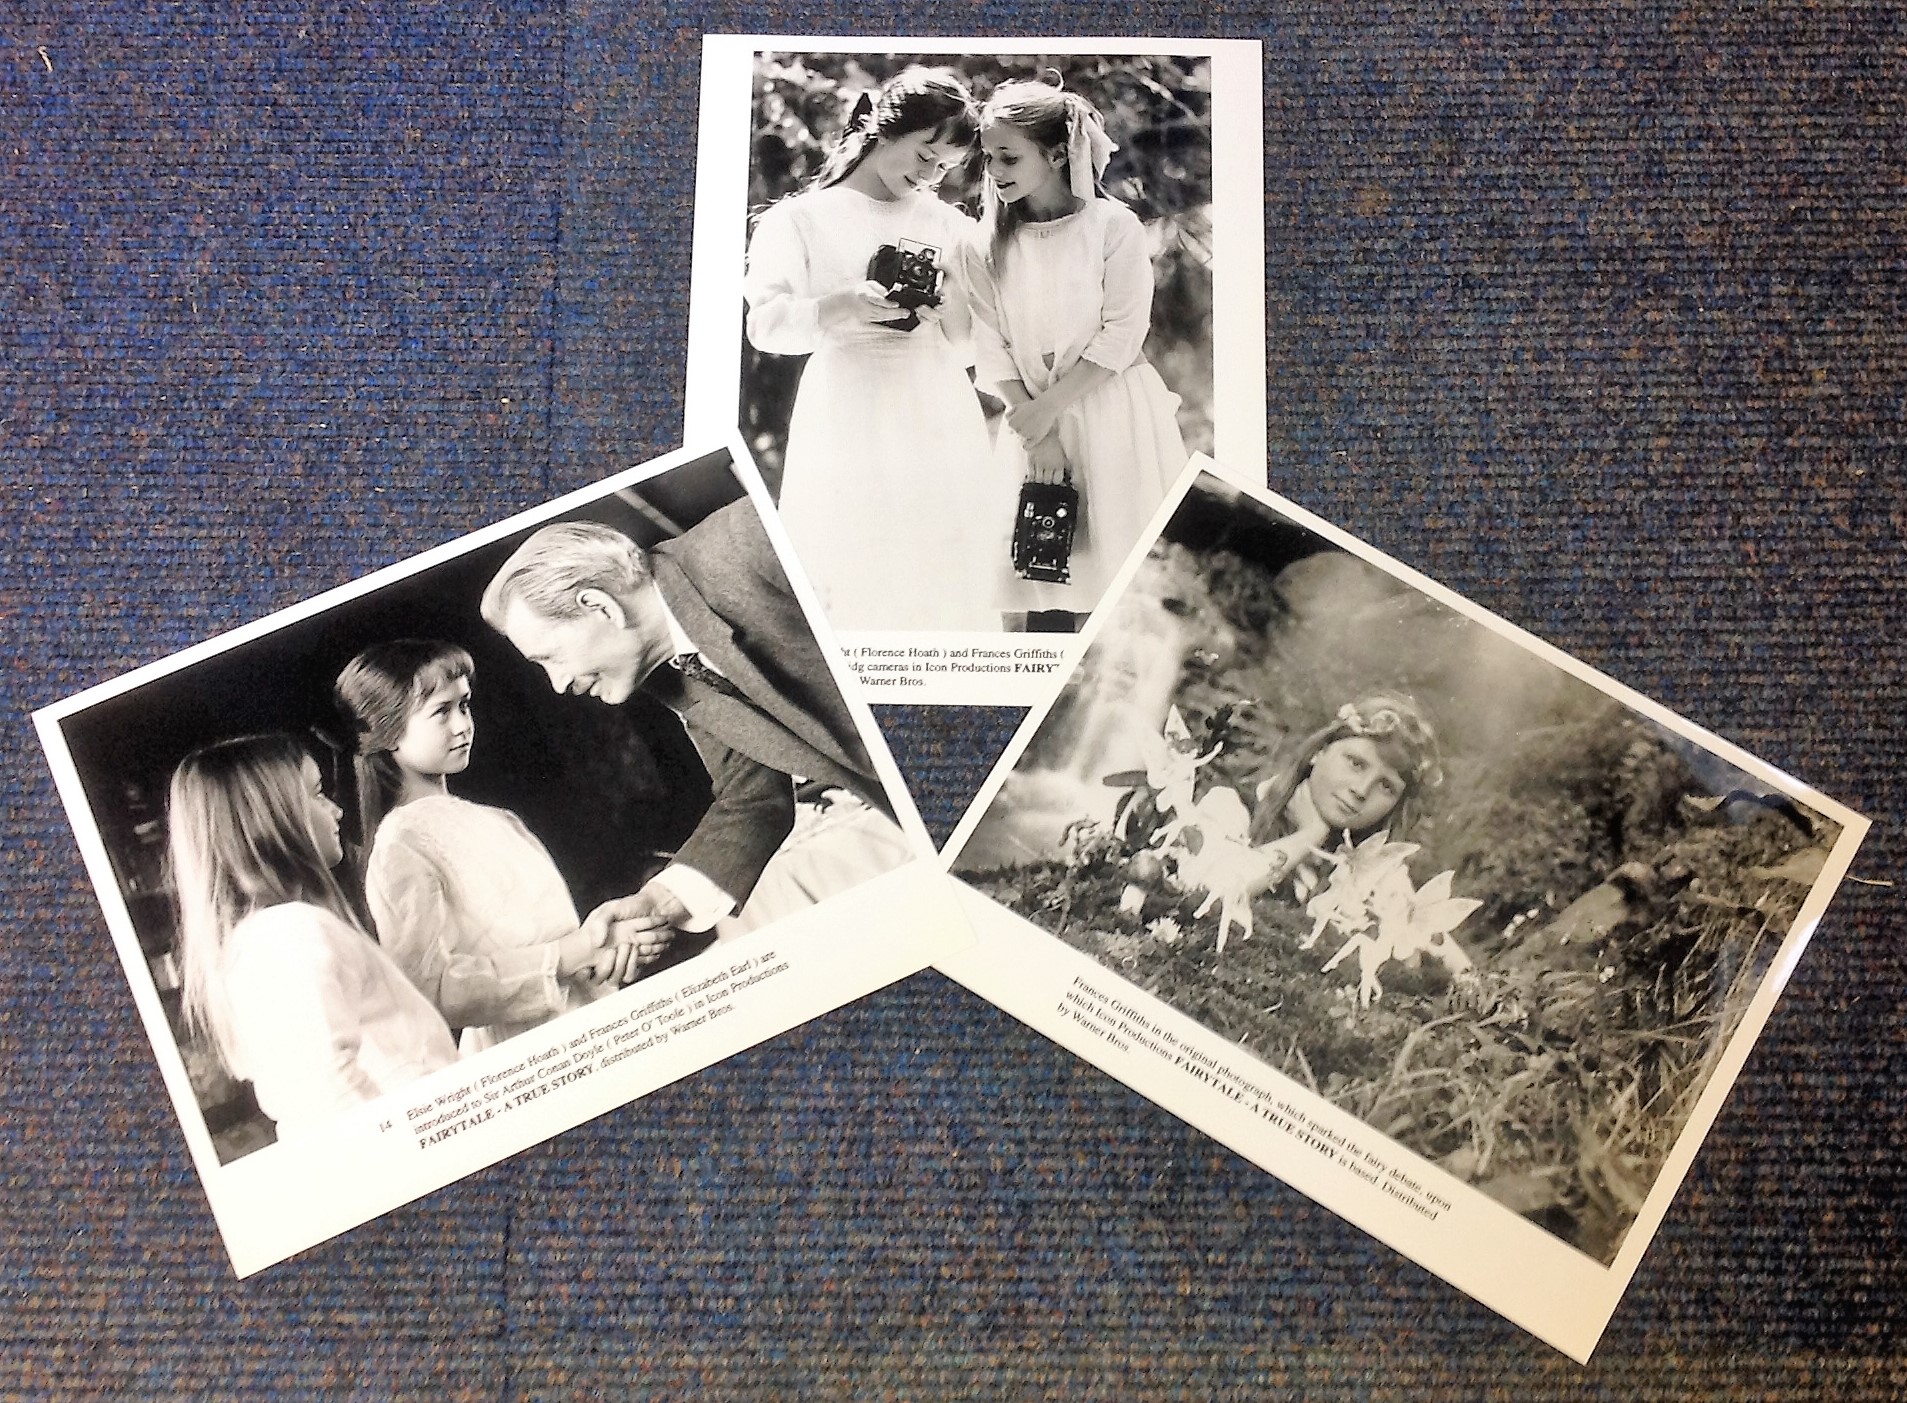 Fairytale A True Story three black and white lobby cards from the 1997 French-American fantasy drama